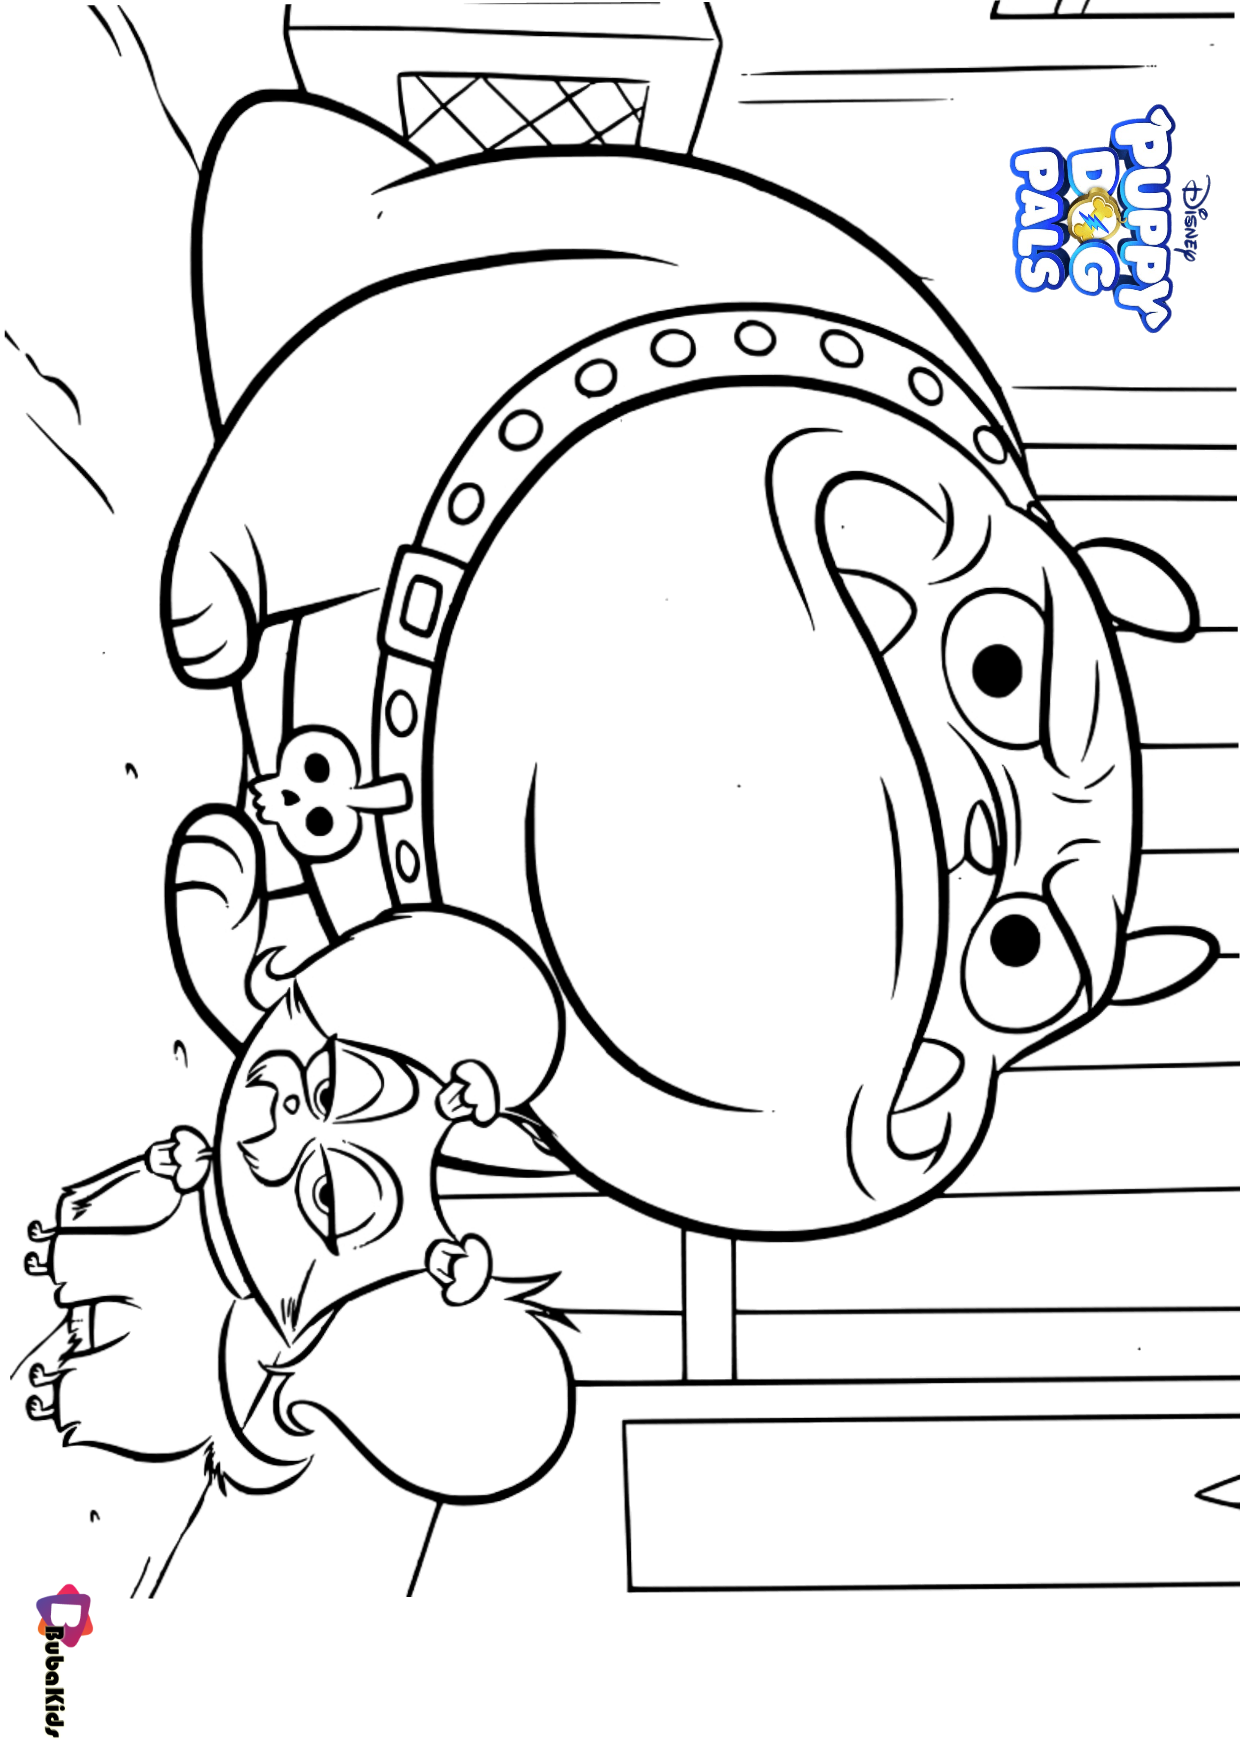 Rufus and Cupcake Puppy Dog Pals coloring page Wallpaper